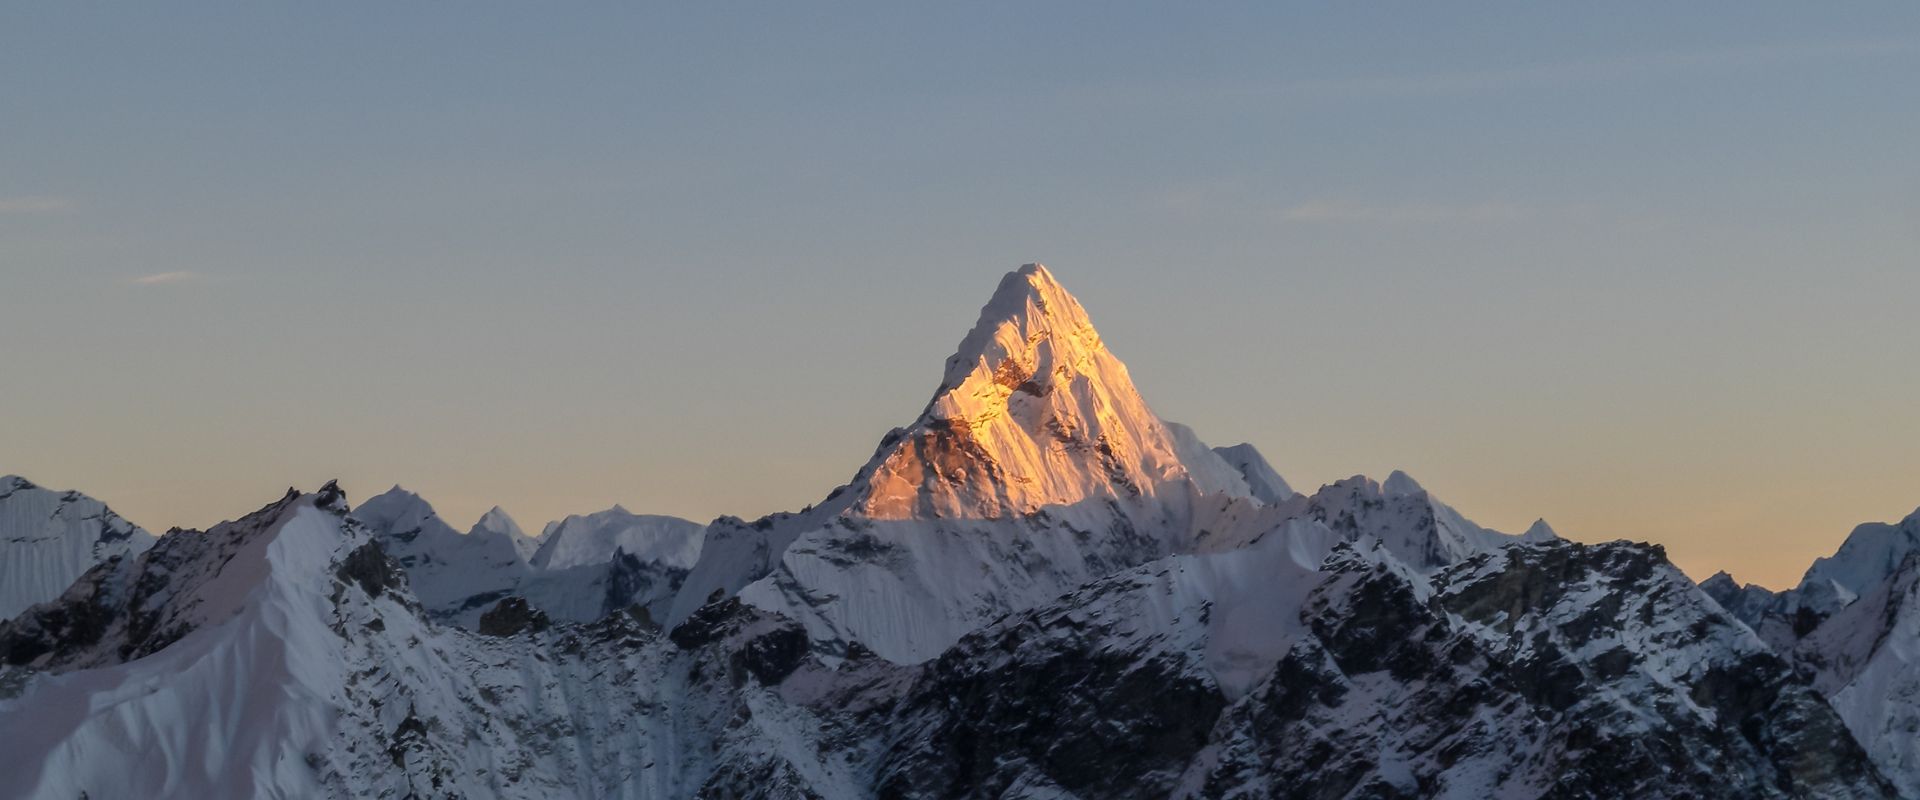 the everest mountain